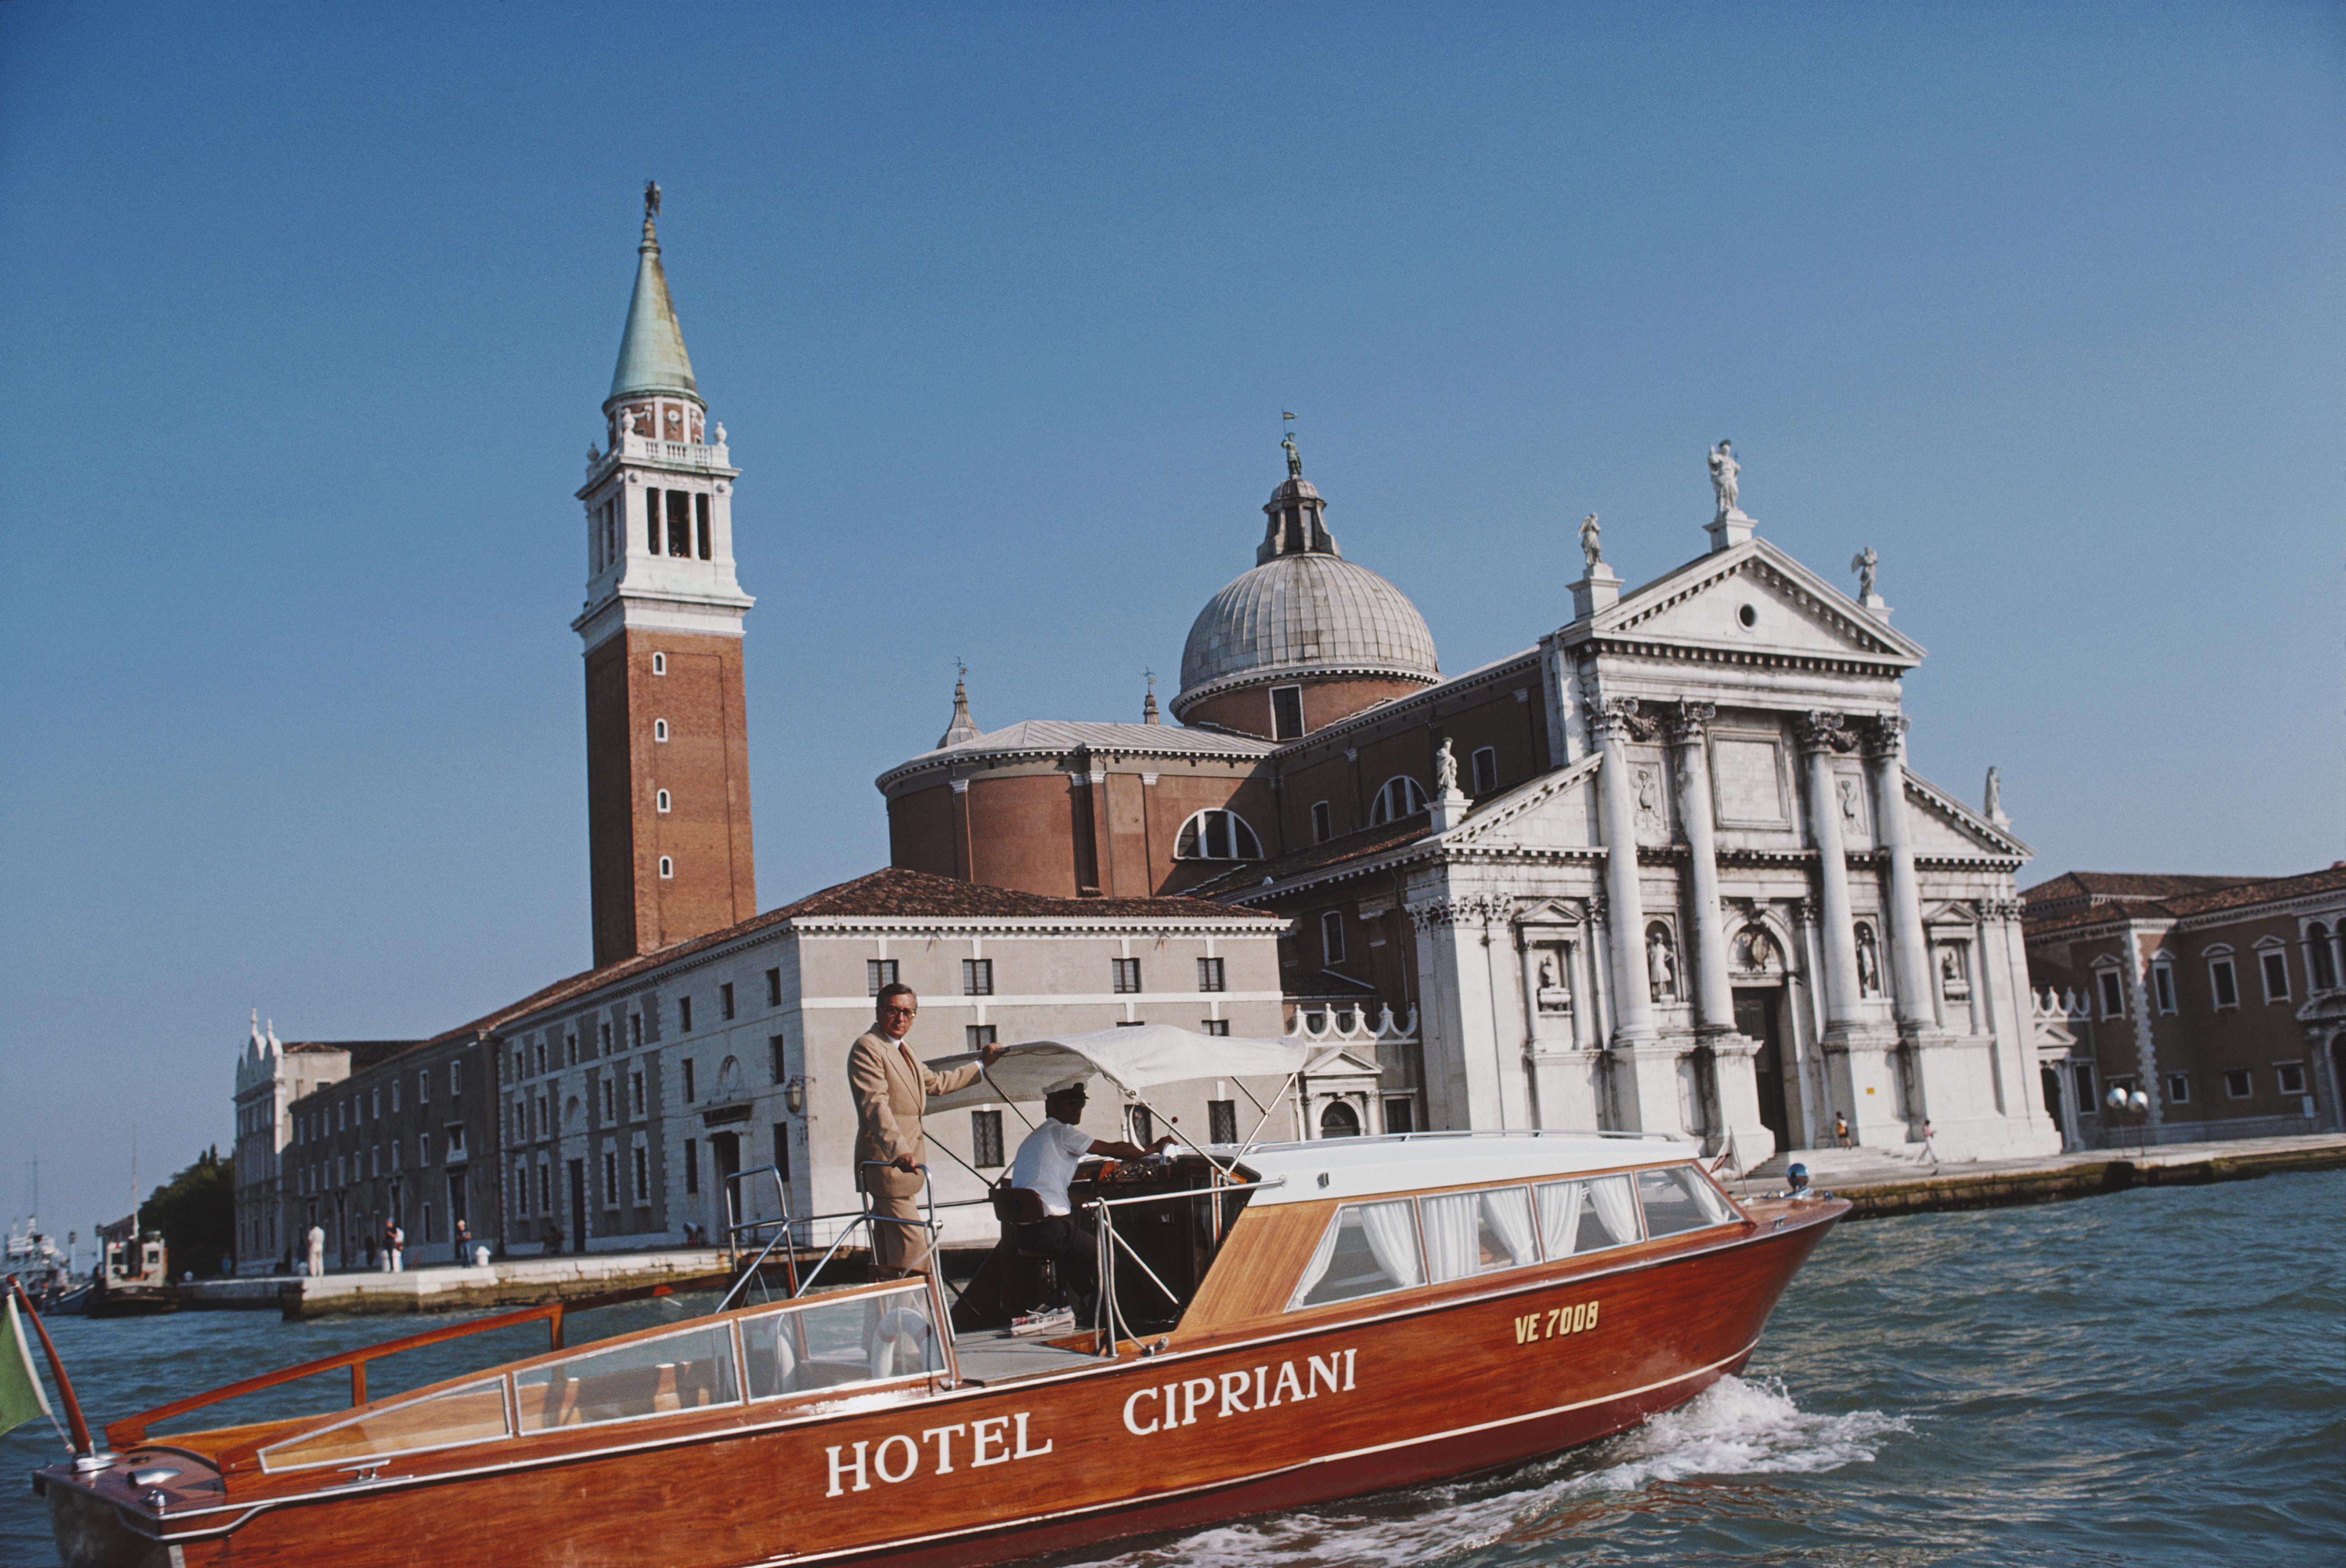 Slim Aarons
Natale Rusconi in Venice
1978 (printed later)
C print 
Estate stamped and numbered edition of 150 
with Certificate of authenticity

Natale Rusconi riding a Hotel Cipriani motor launch with the Church of San Giorgio Maggiore on San